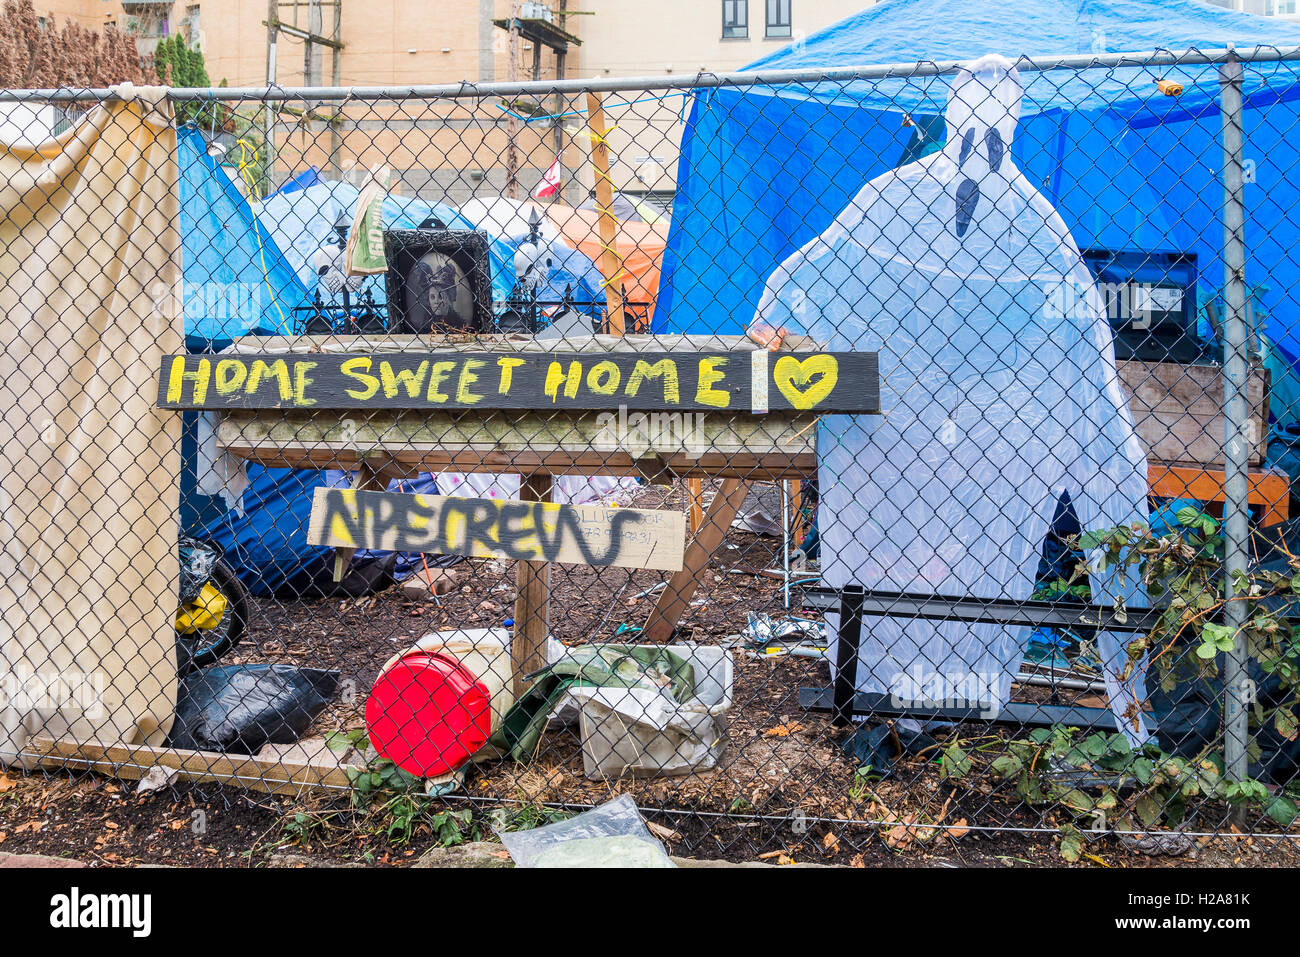 Dtes Homeless Tent City On Hastings Street Downtown East Side Vancouver British Columbia Canada C Michael Wheatley Stock Photo Alamy